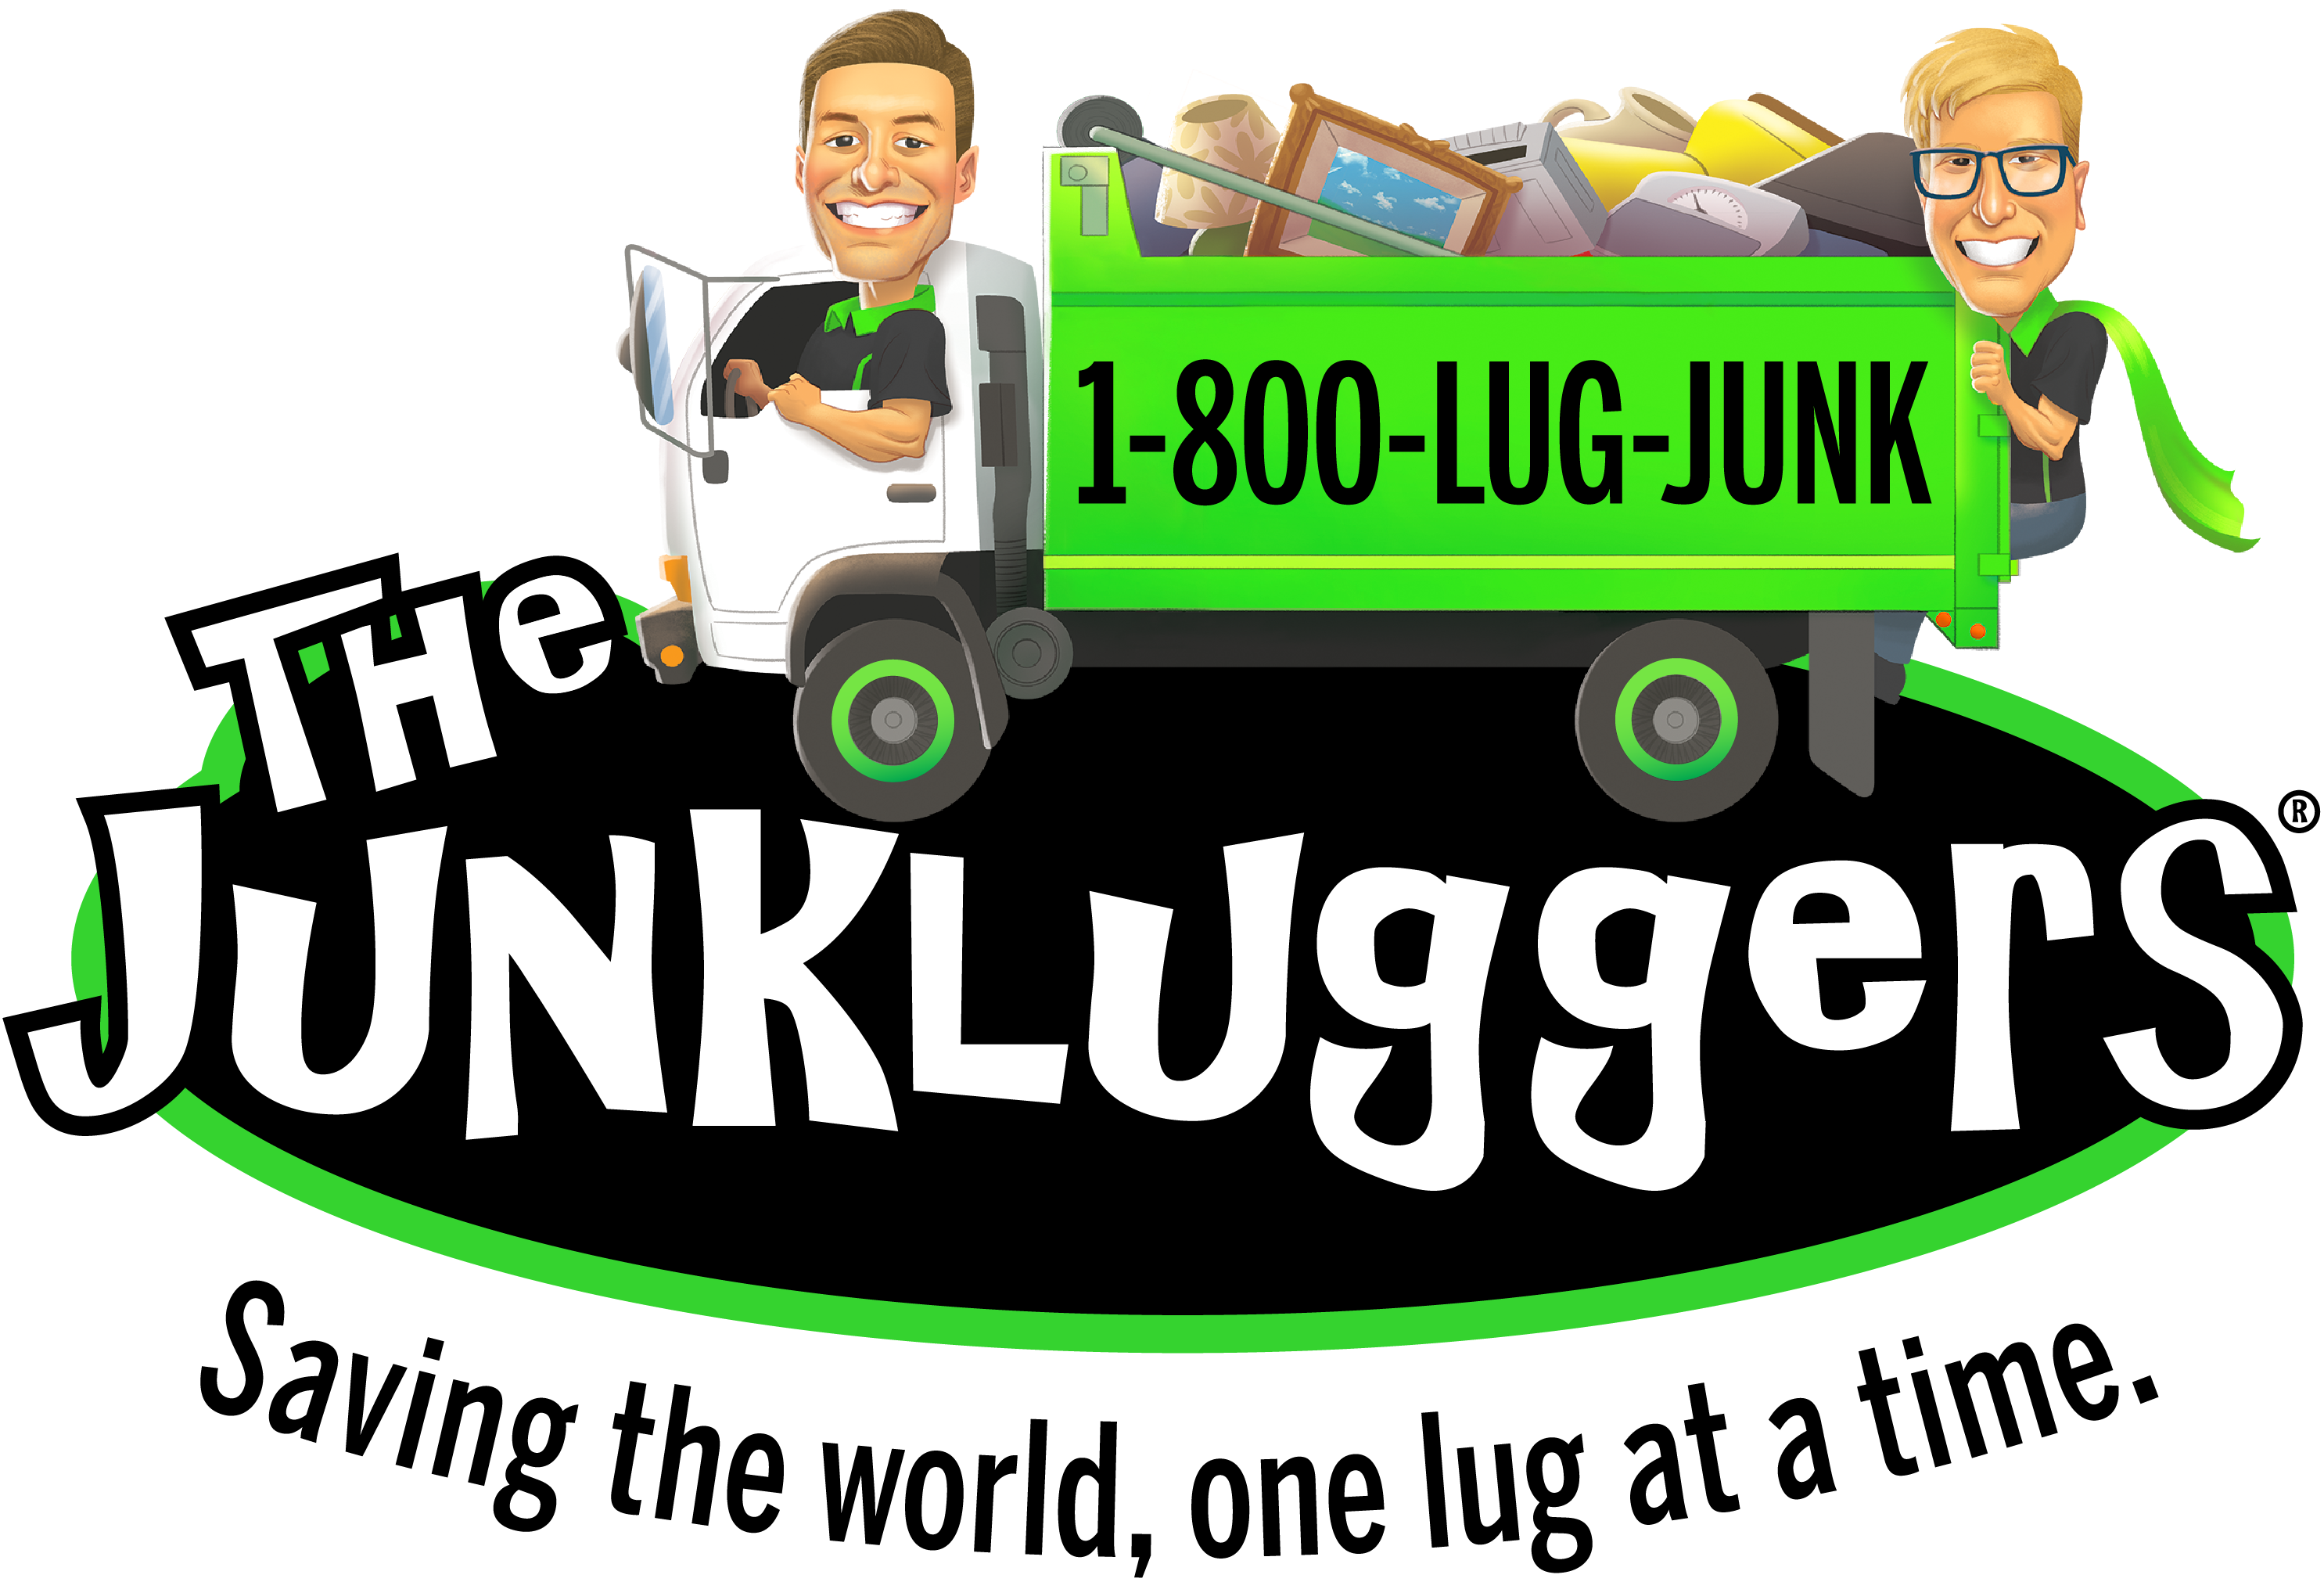 The Junkluggers Logo